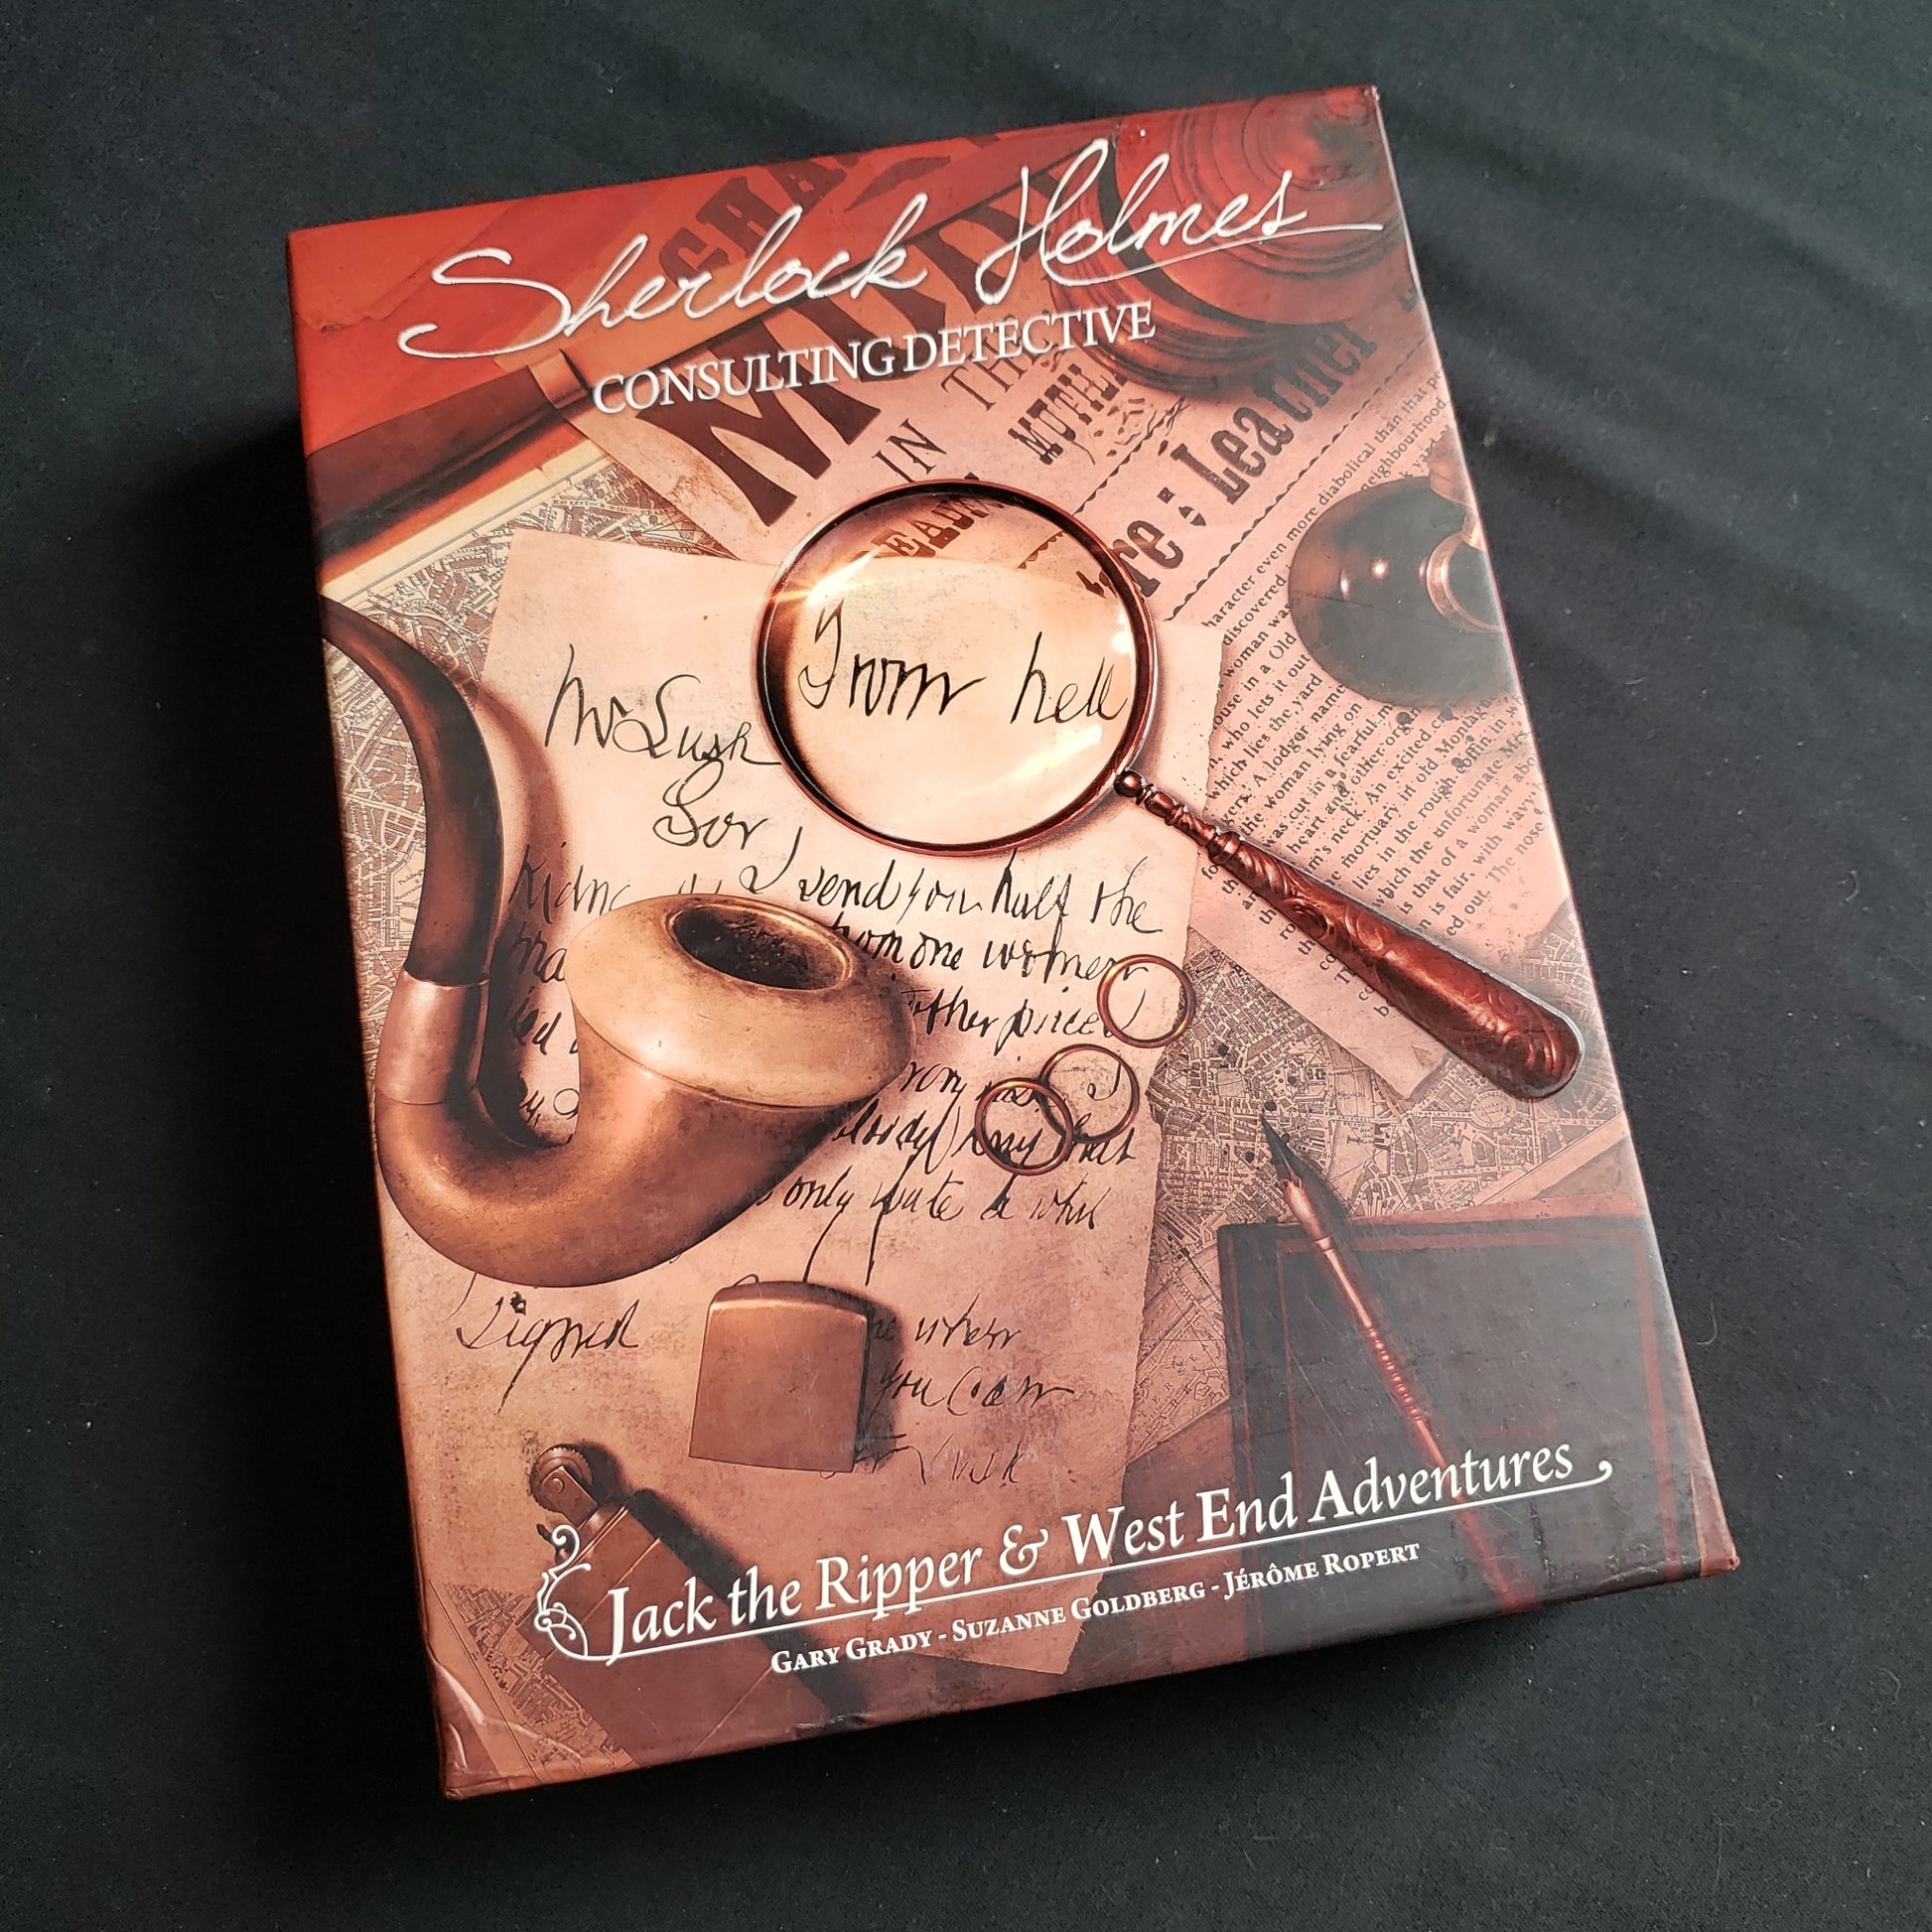 Image shows the front cover of the box of the Sherlock Holmes Consulting Detective: Jack the Ripper game